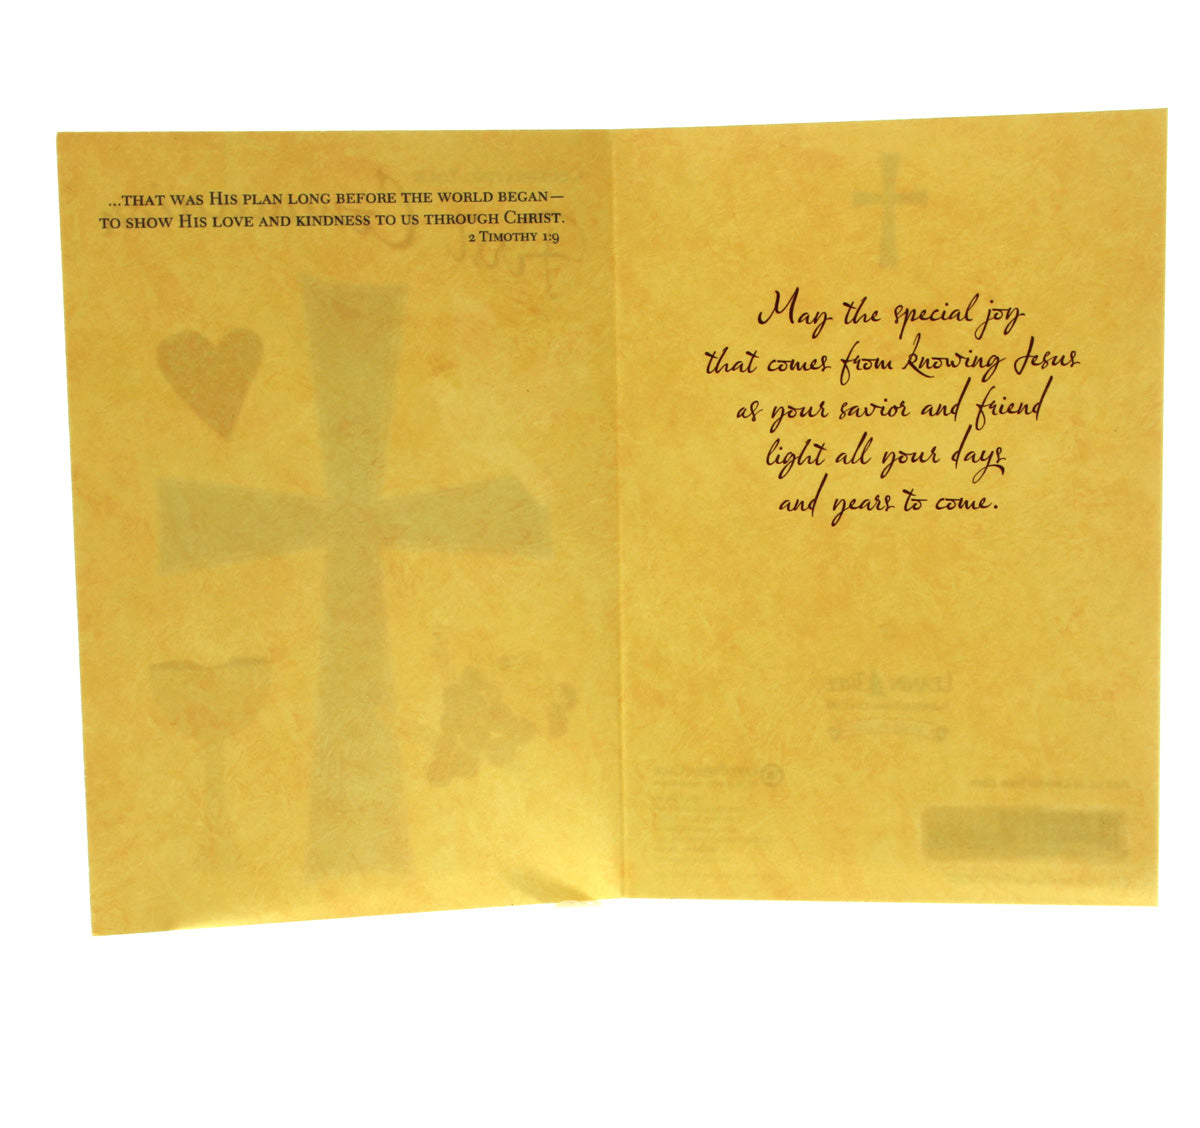 First Communion Card: Celebrating your first communion